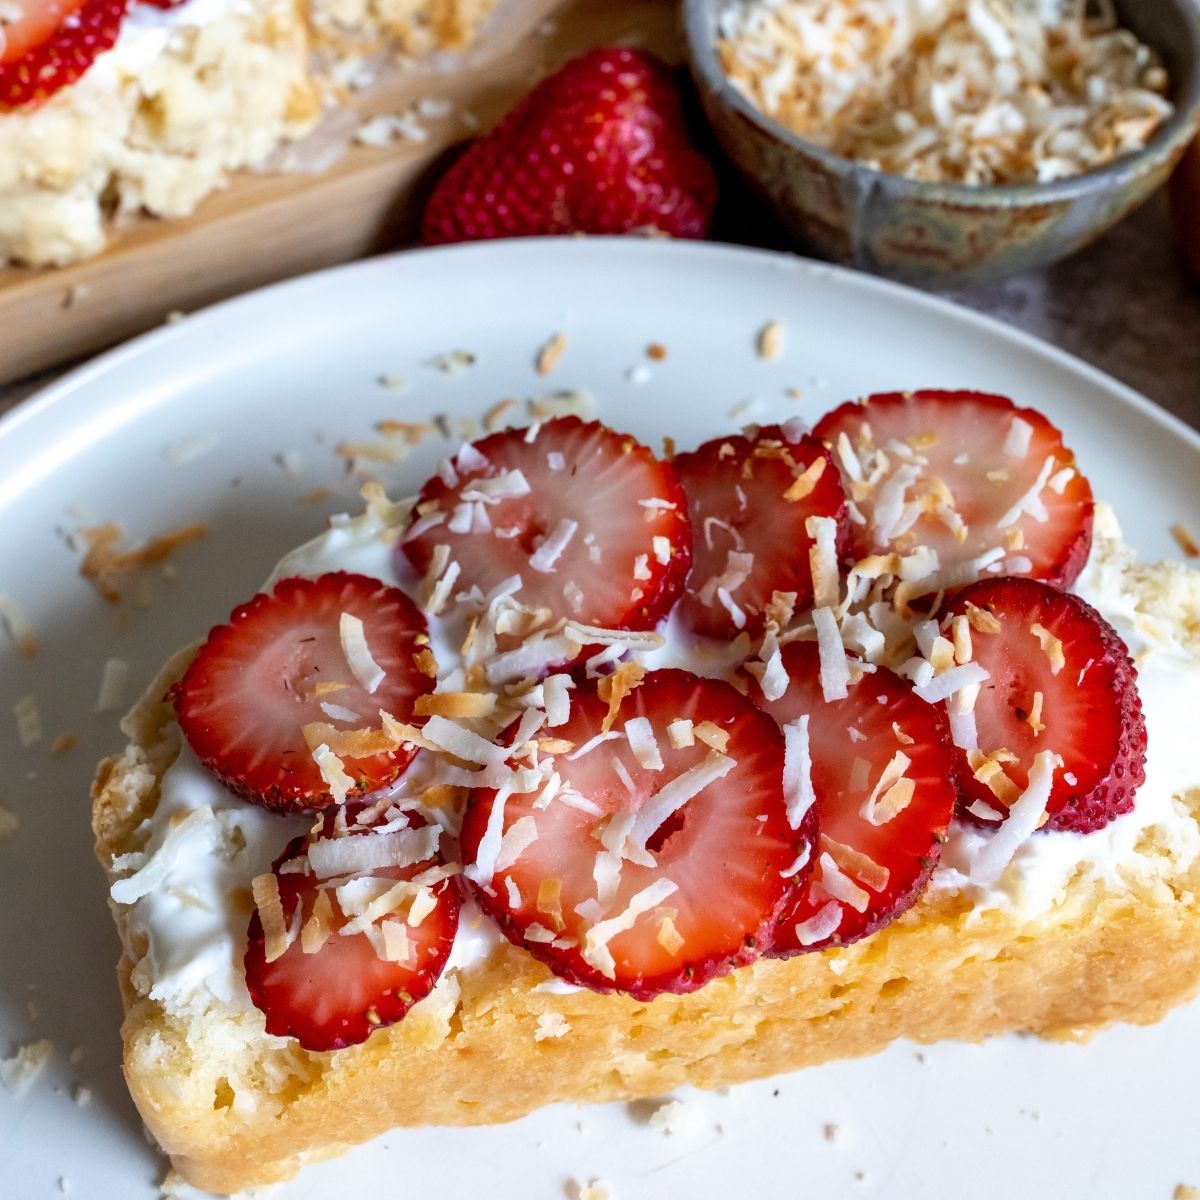 Coconut Bread With Strawberries